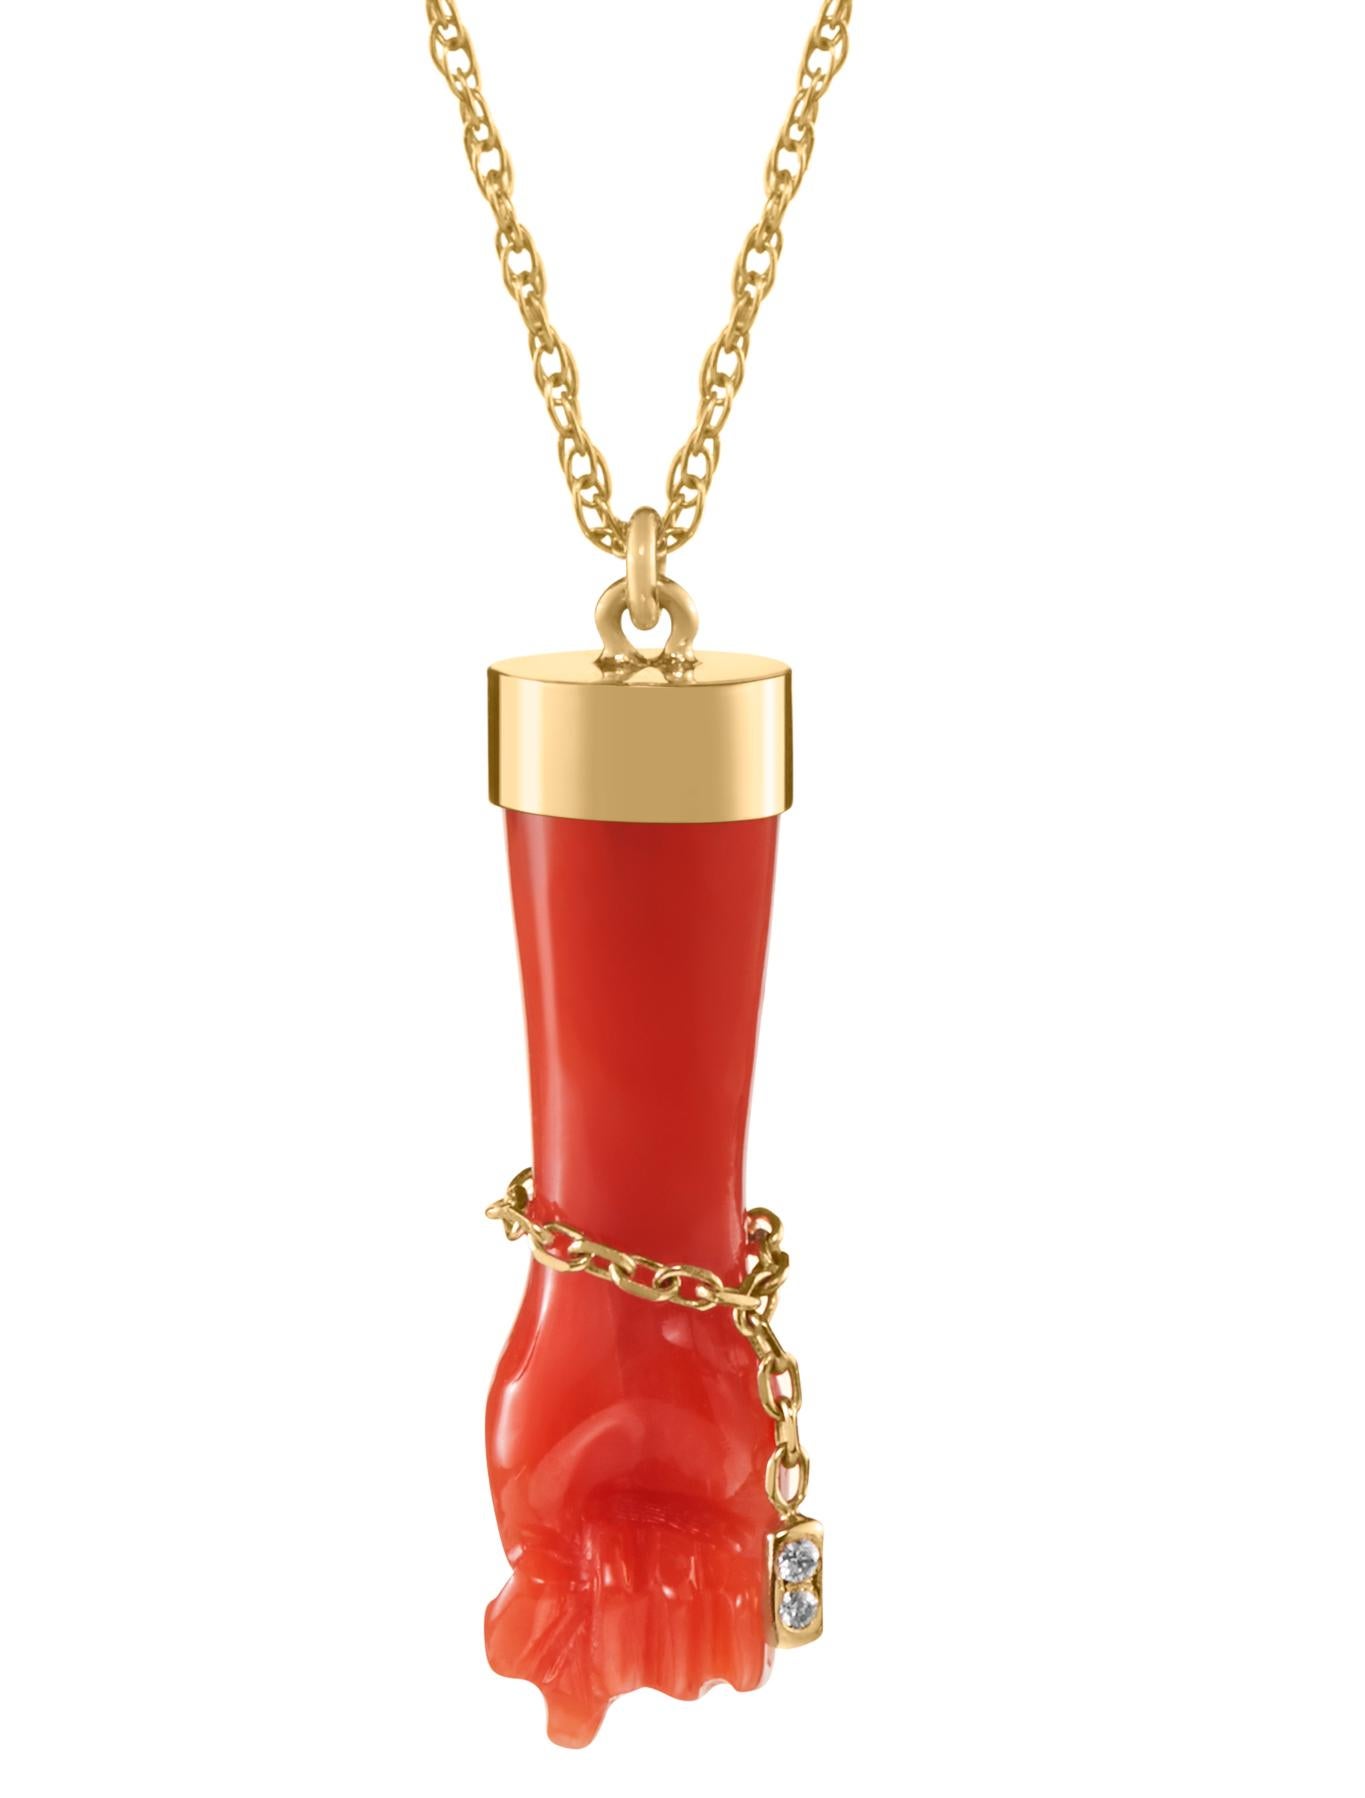 This custom hand carved mediterranean coral pendant necklace uses coral which was sourced from a small family factory in Italy. Each hand is slightly unique, but all are bright red in color with a 14k gold cap. There is a dainty 